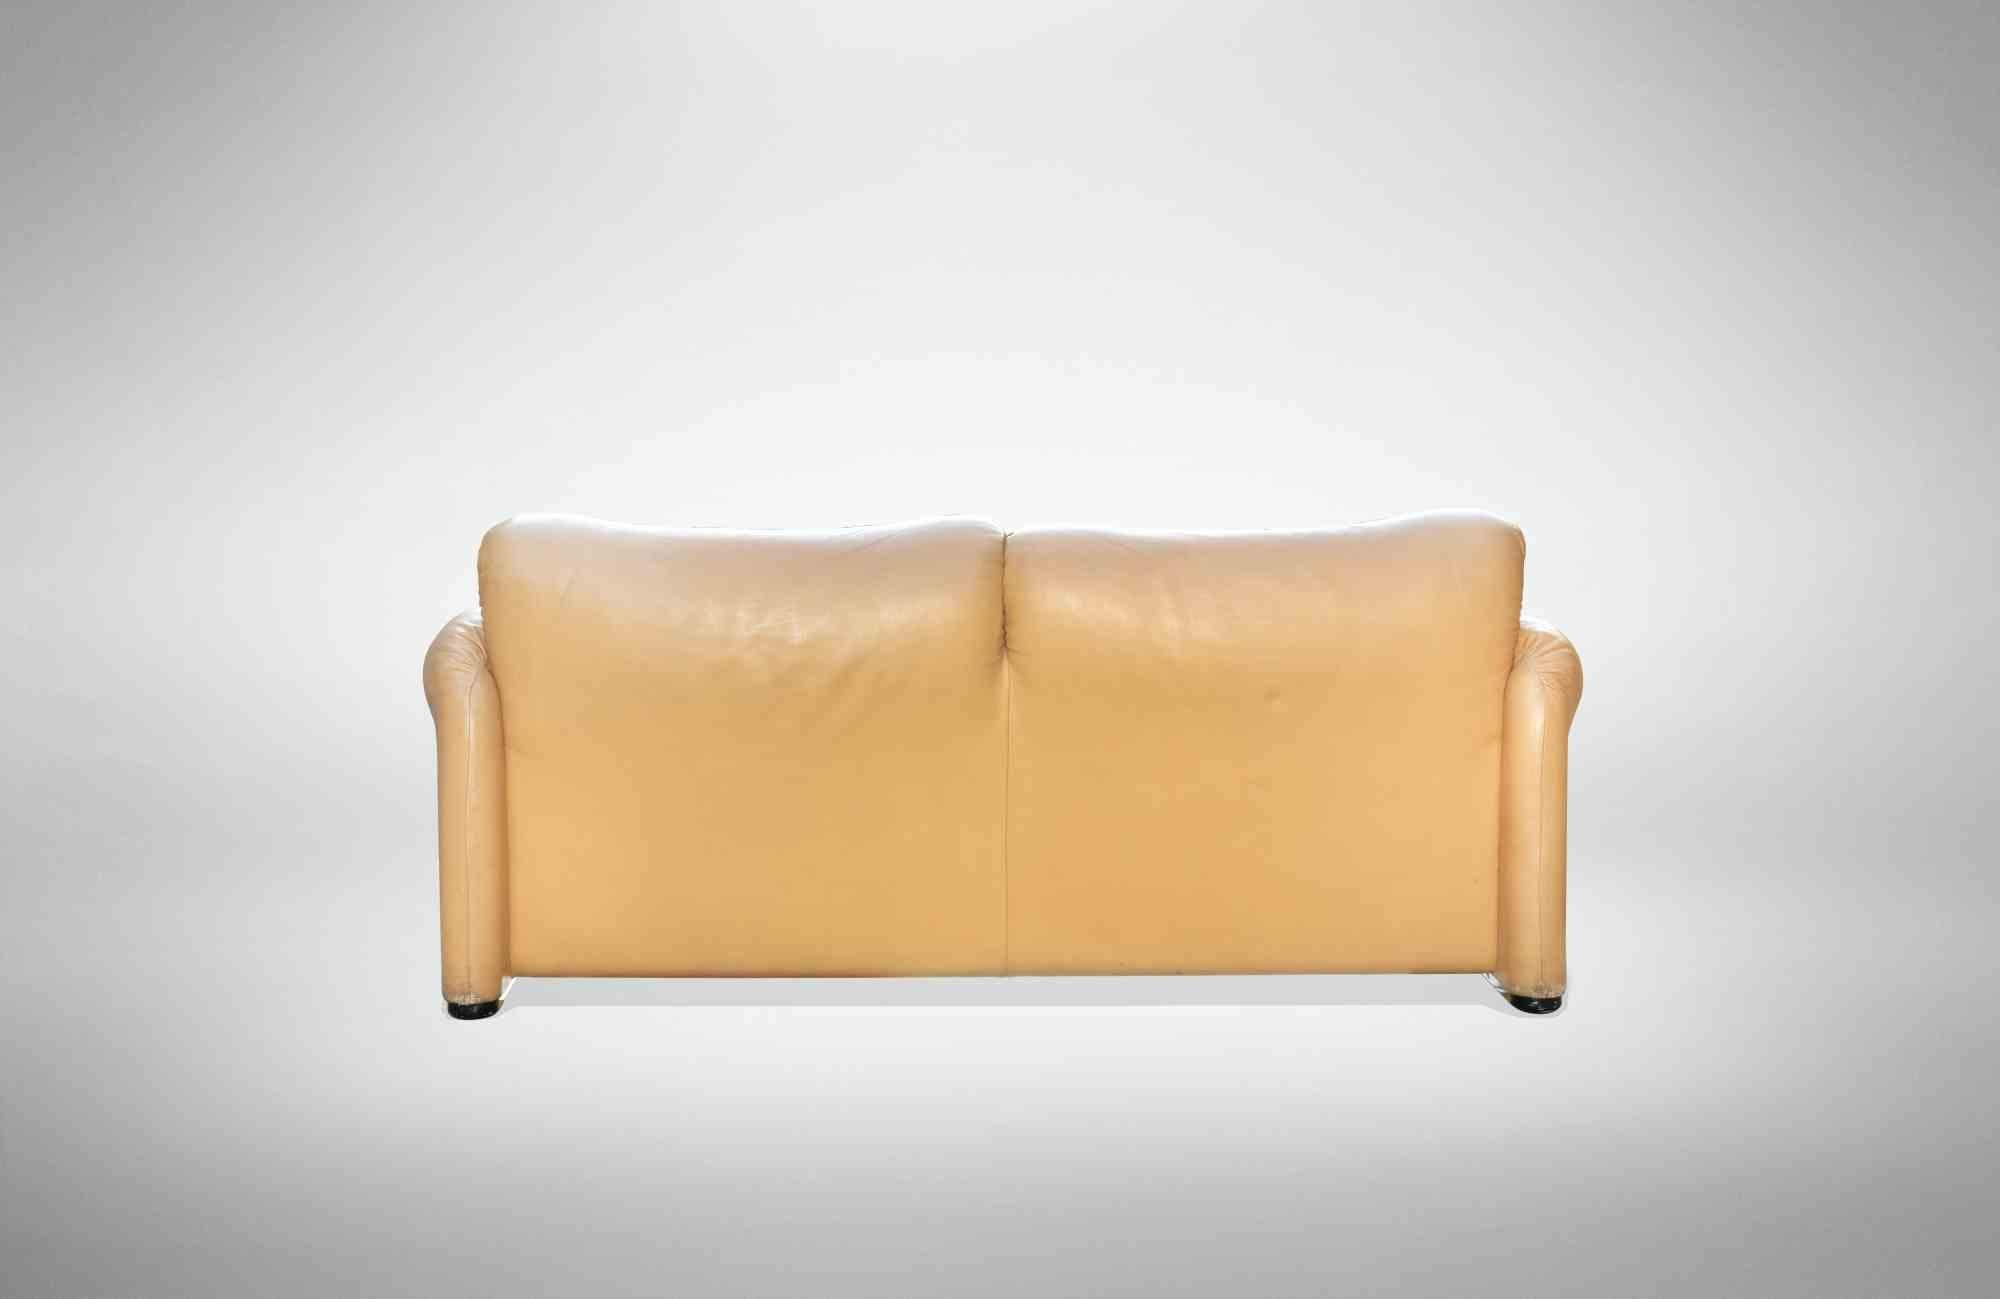 Pair of Maralunga sofas is an original and iconic design item designed by Vico Magistretti for Cassina.

Yellow leather sofa.

Dimensions:
Seatback height: 70 cm (close) - 100 cm (open)
Lenght: 165 cm 
Seat height: 42

Maralunga is one of